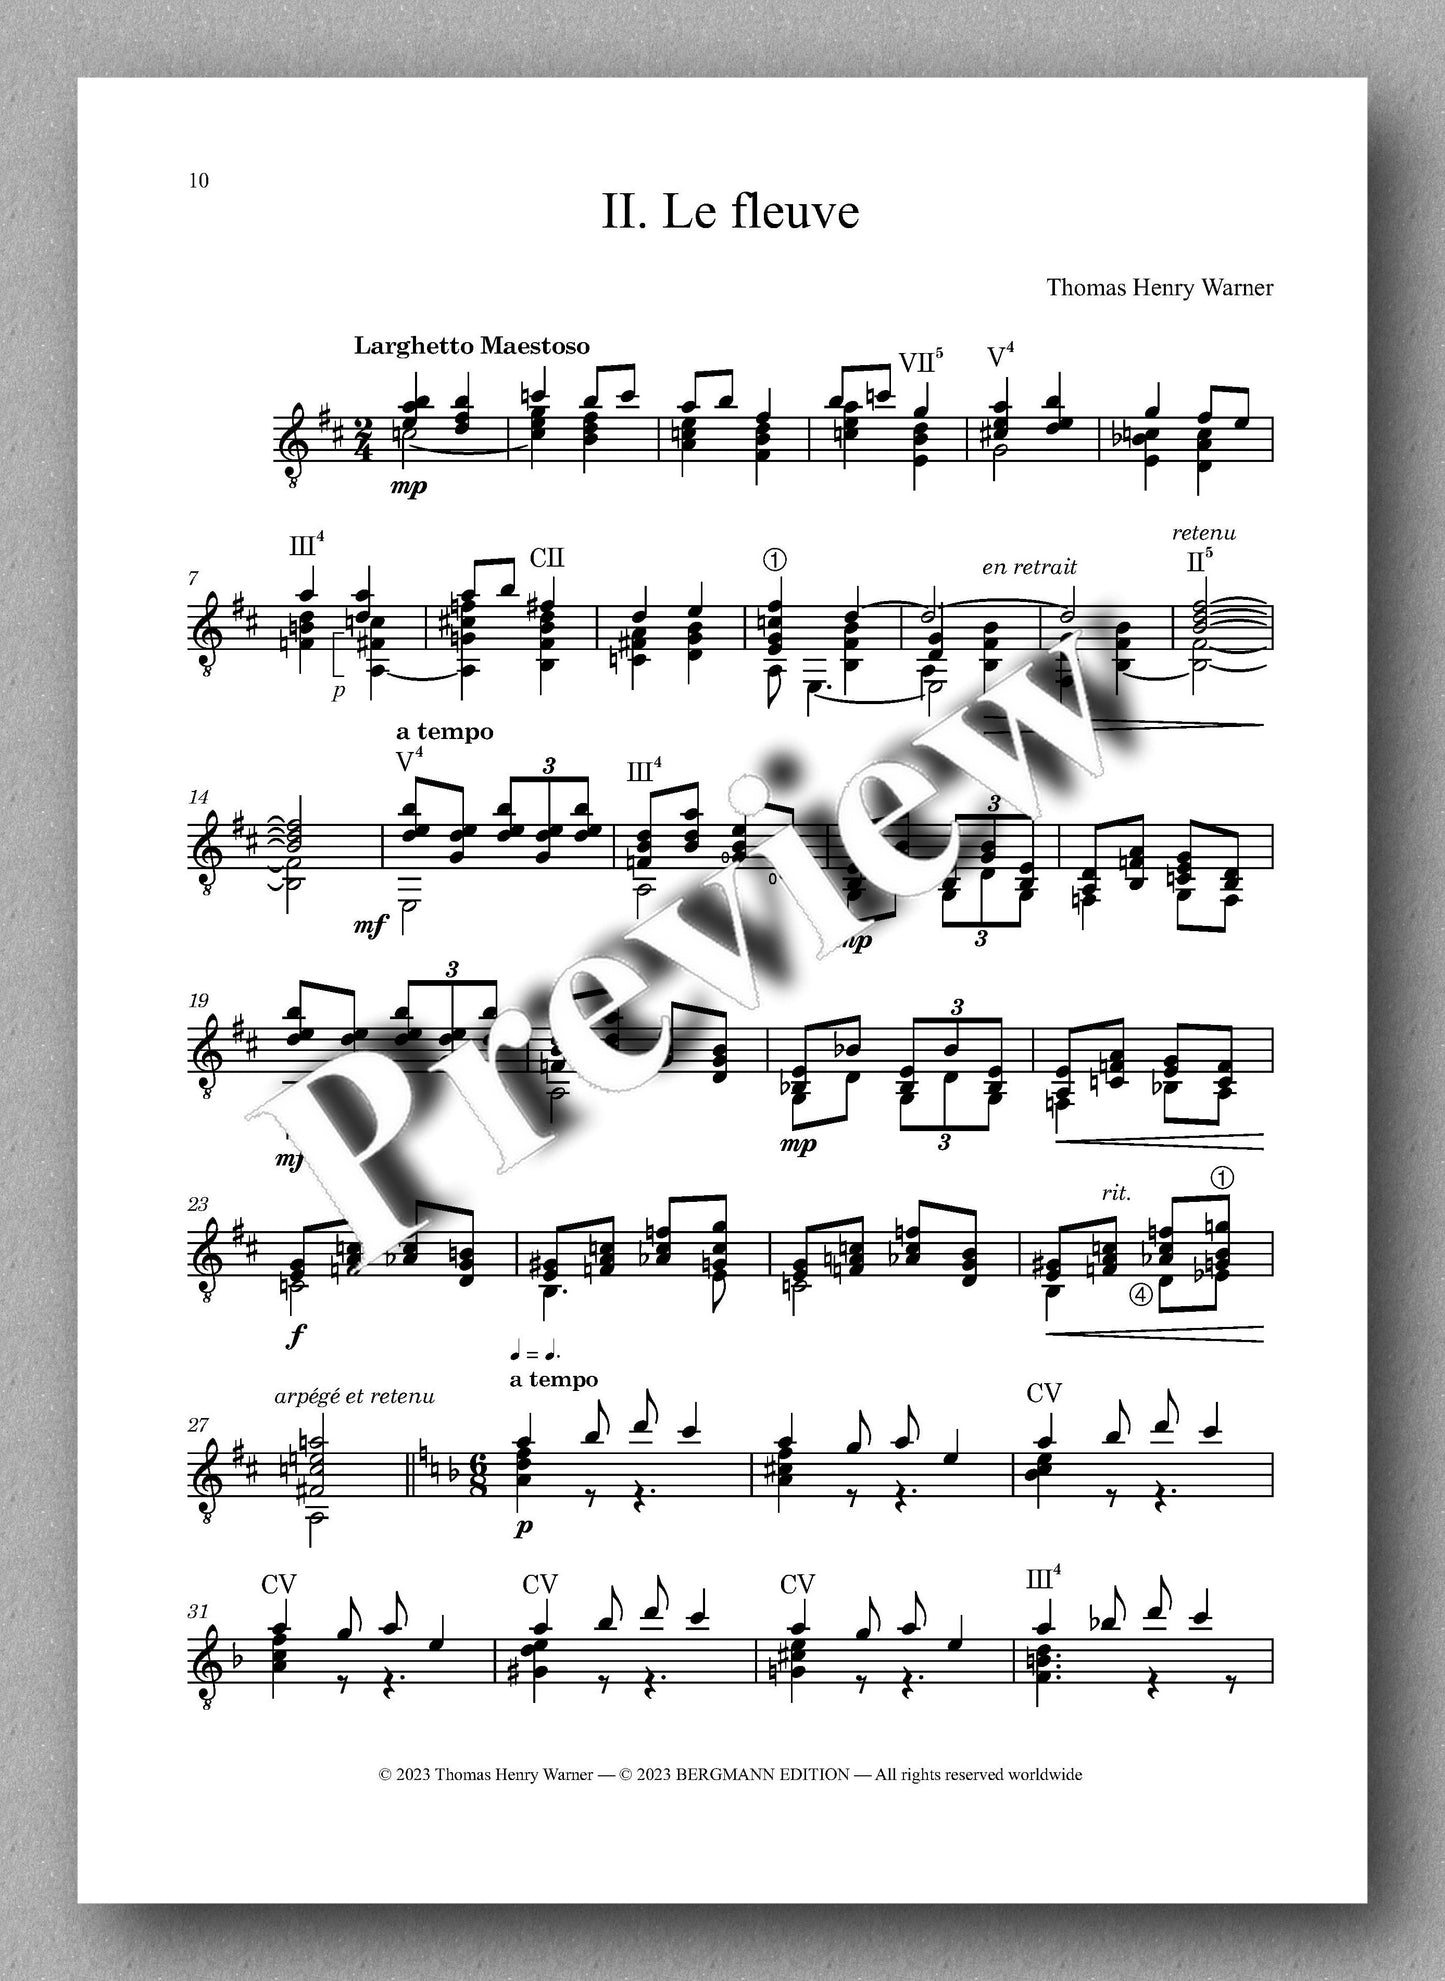 Danses Occitanes, by  Thomas Henry Warner- preview of the music score 2